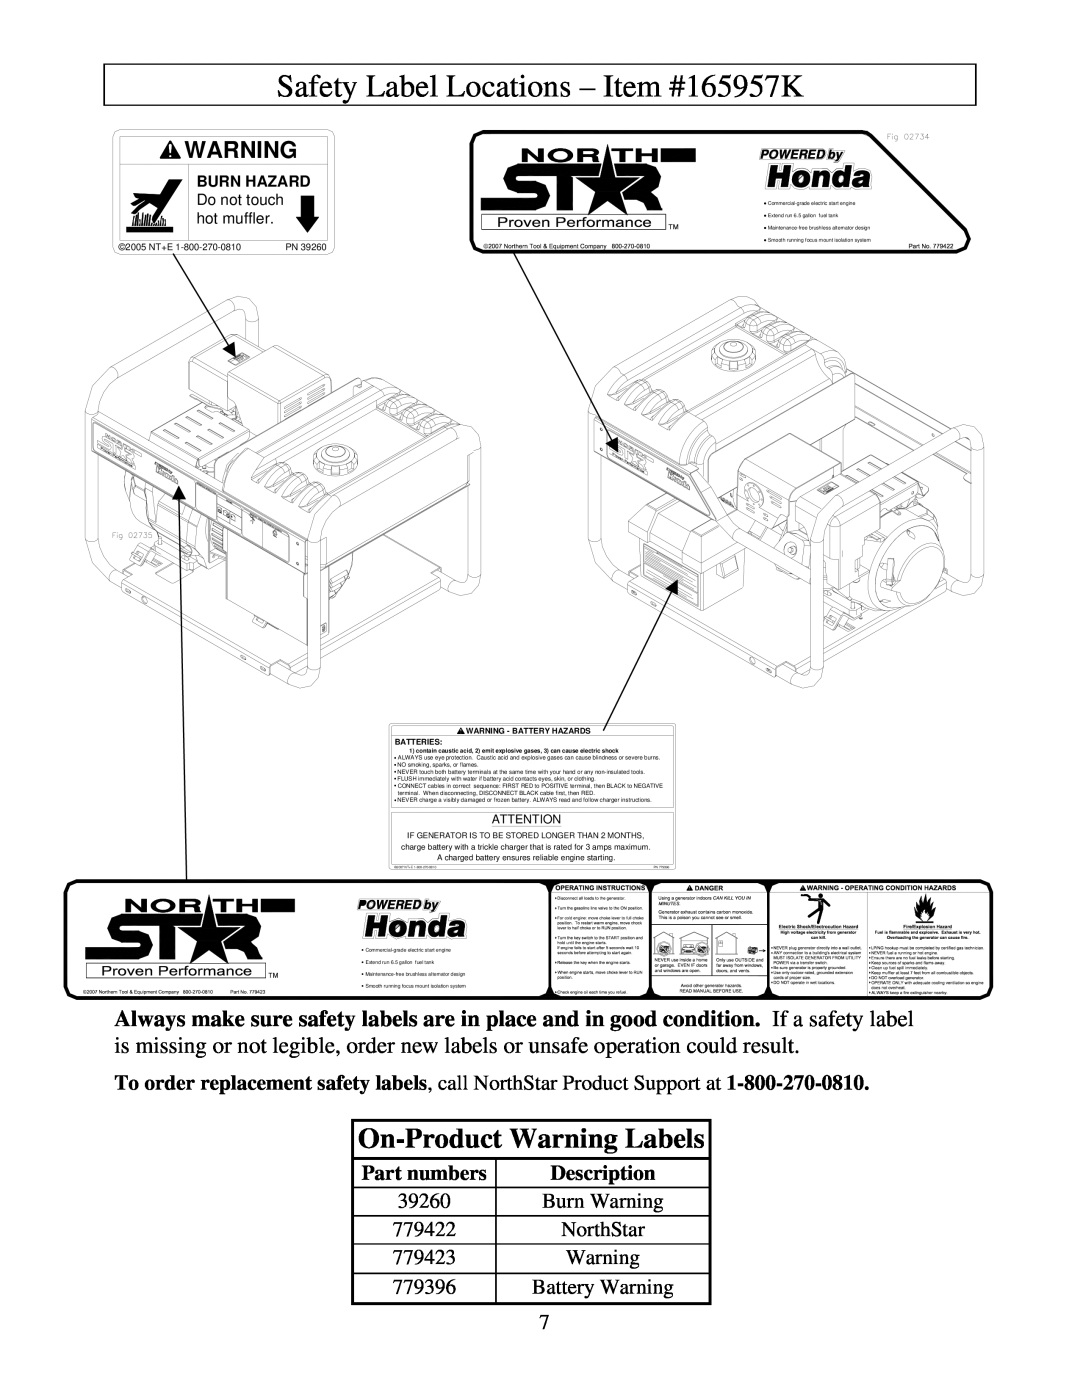 North Star M165957K Safety Label Locations - Item #165957K, On-Product Warning Labels, Part numbers, Description 